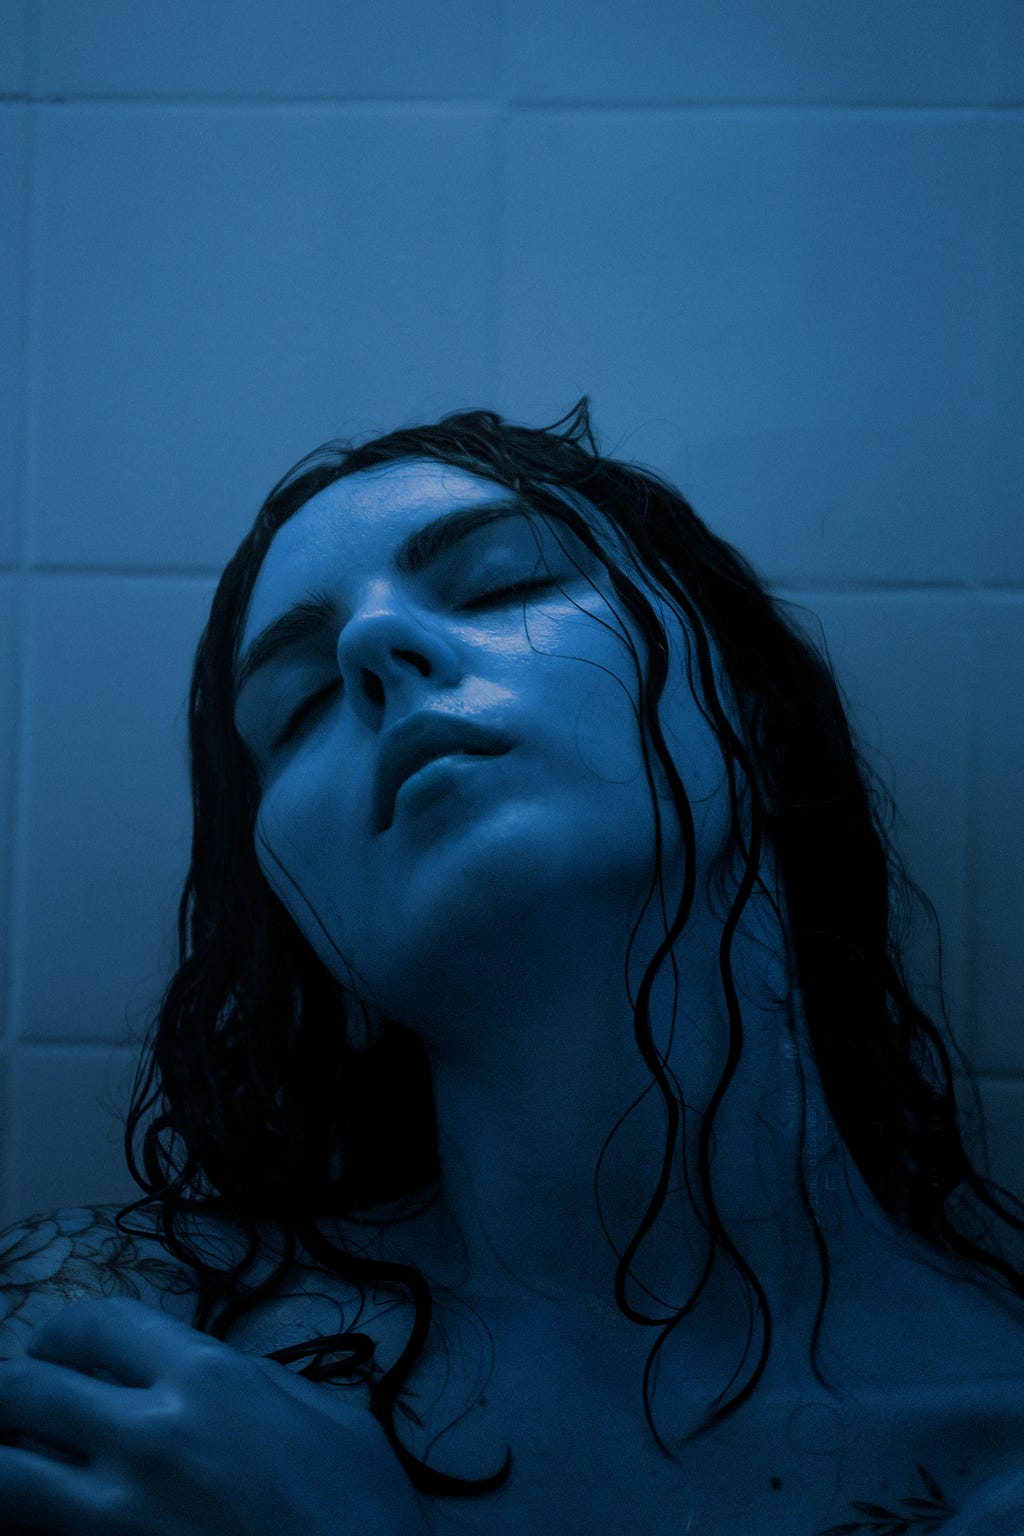 A girl closing eyes while in shower.